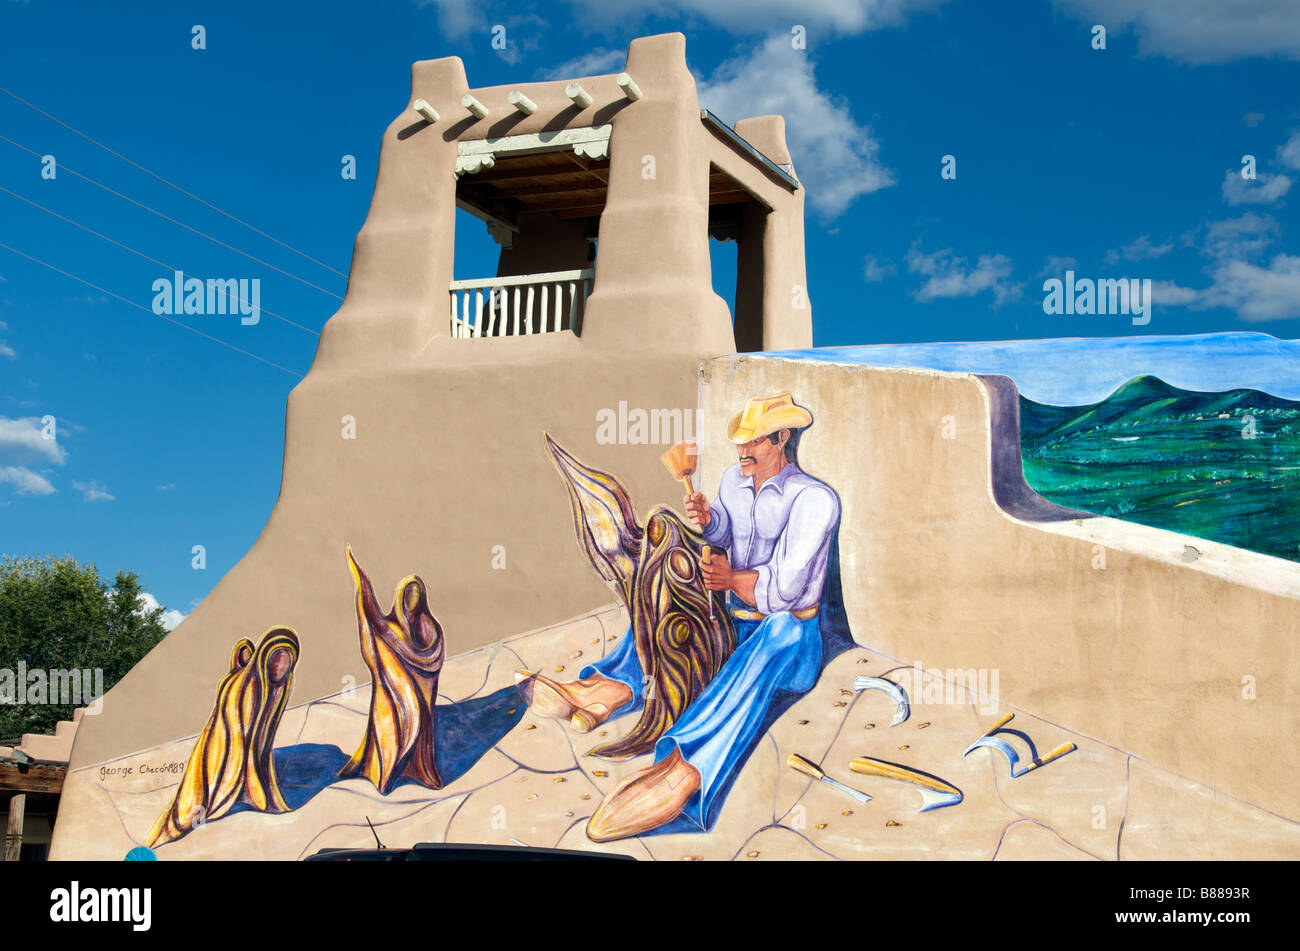 Typical adobe architecture with Indian wall art Taos New Mexico USA Stock Photo